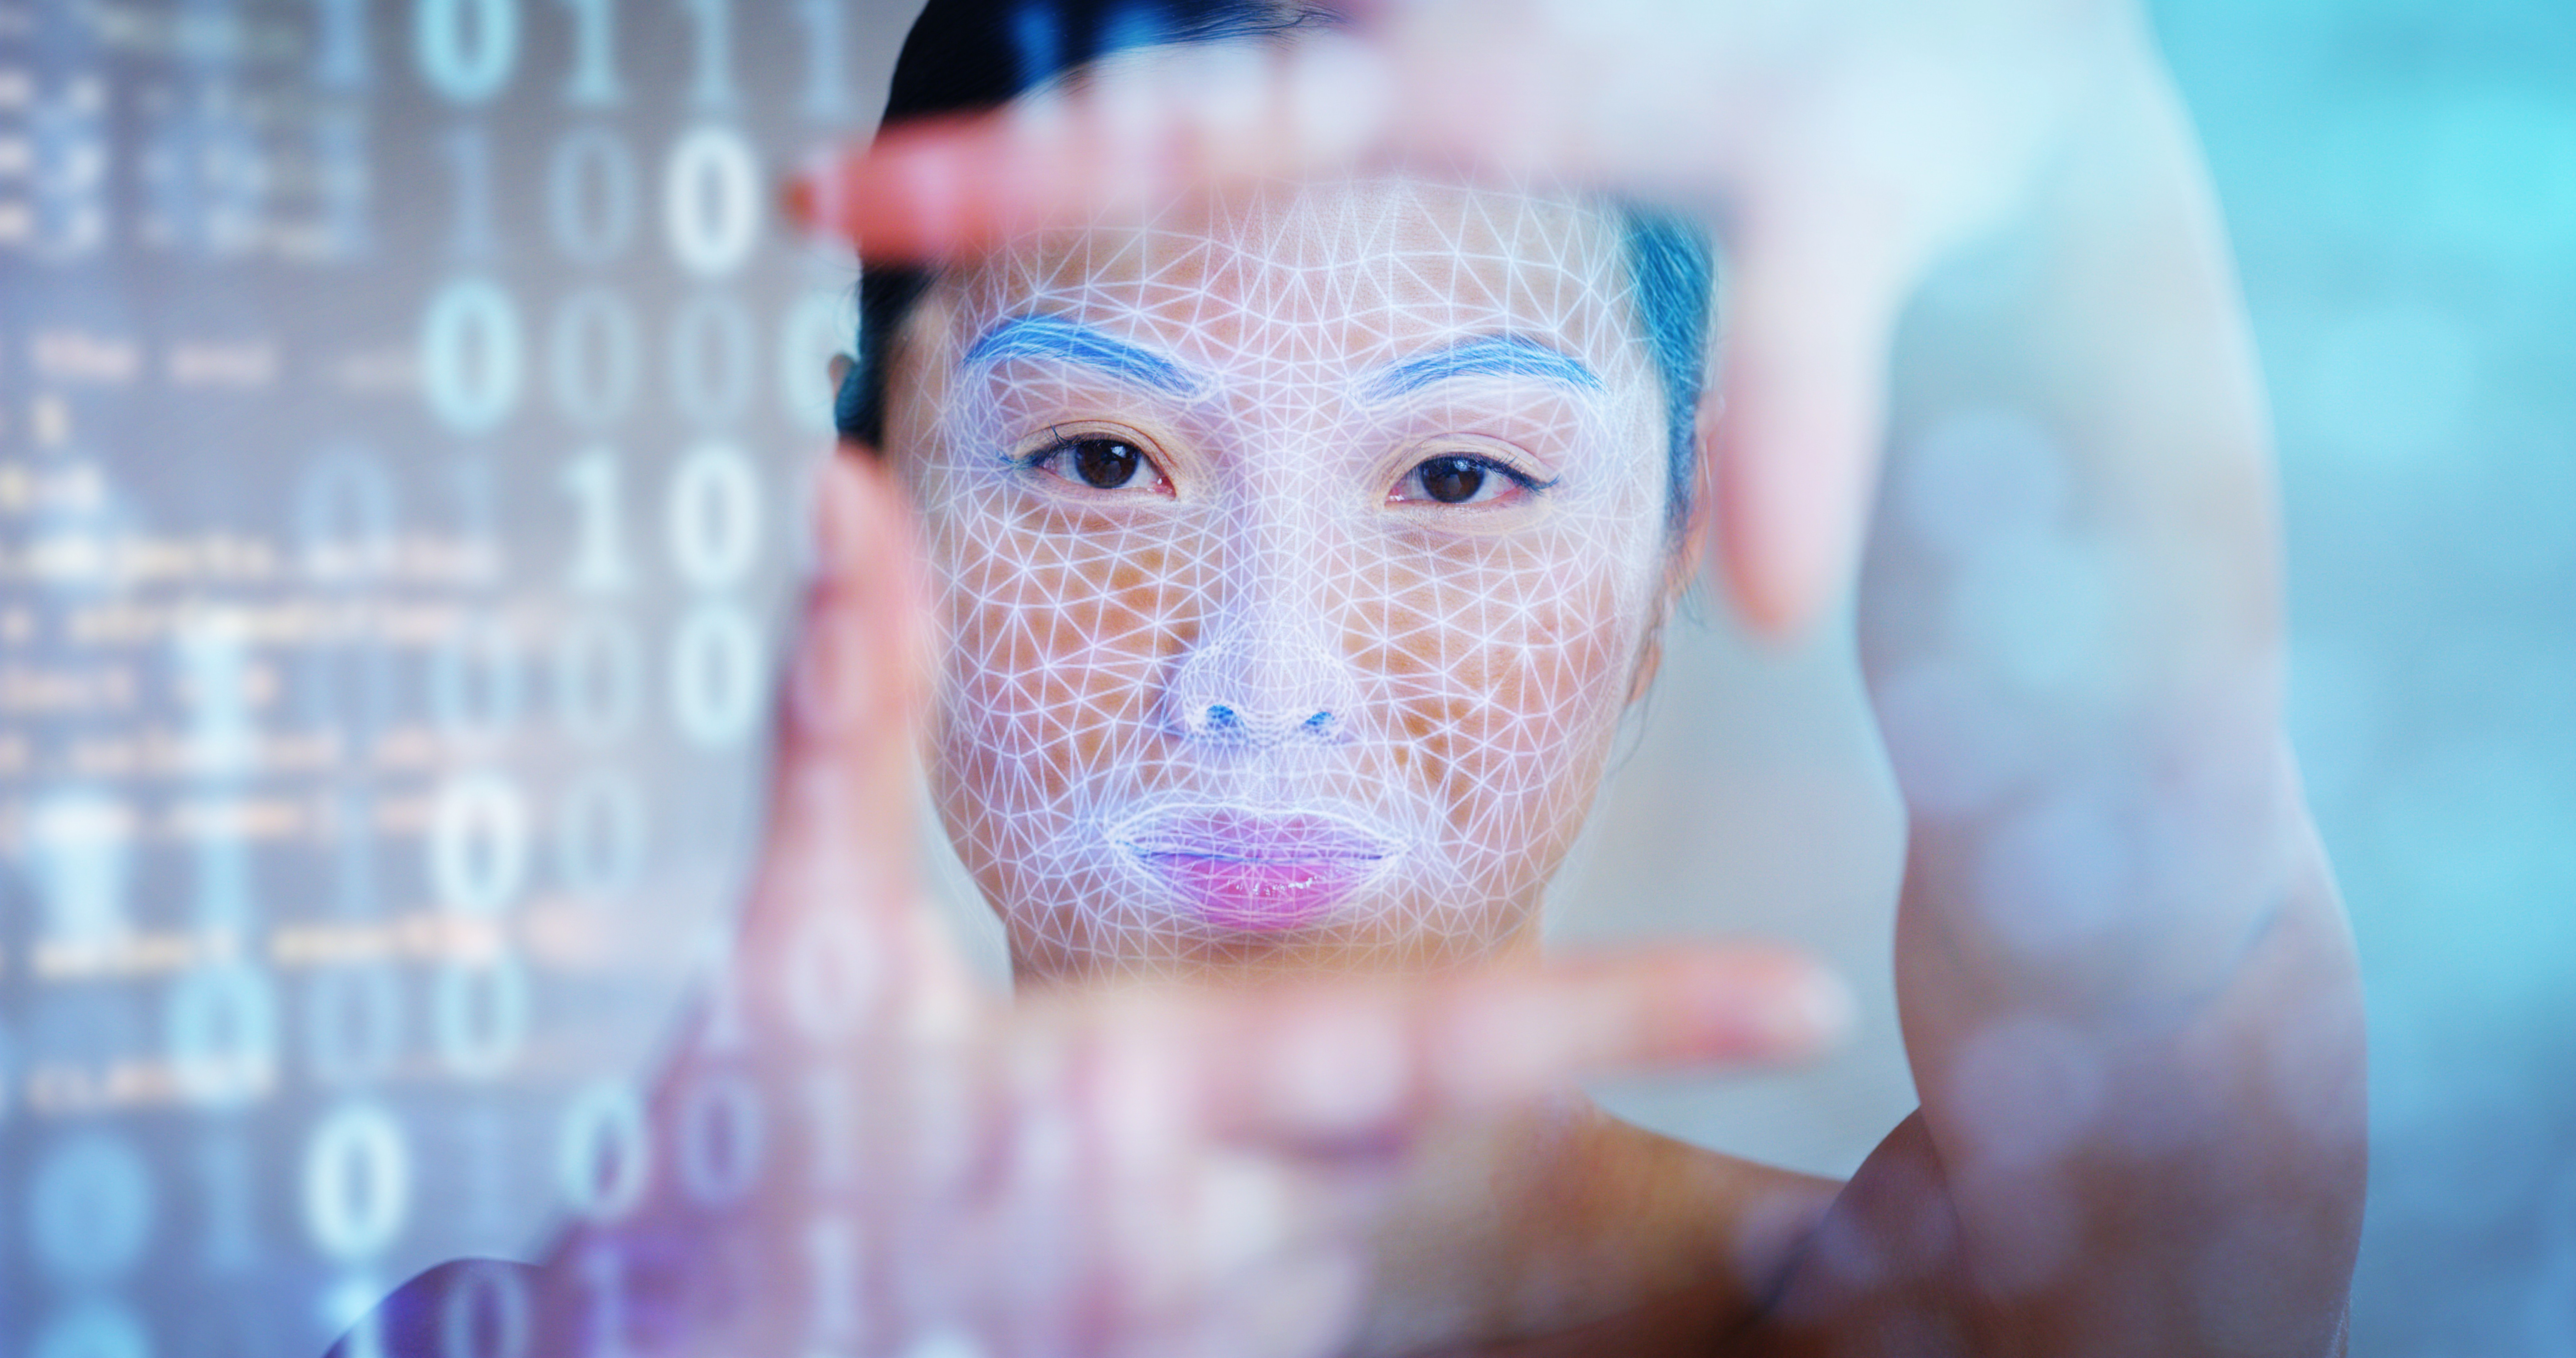 Is facial recognition a privacy threat? 